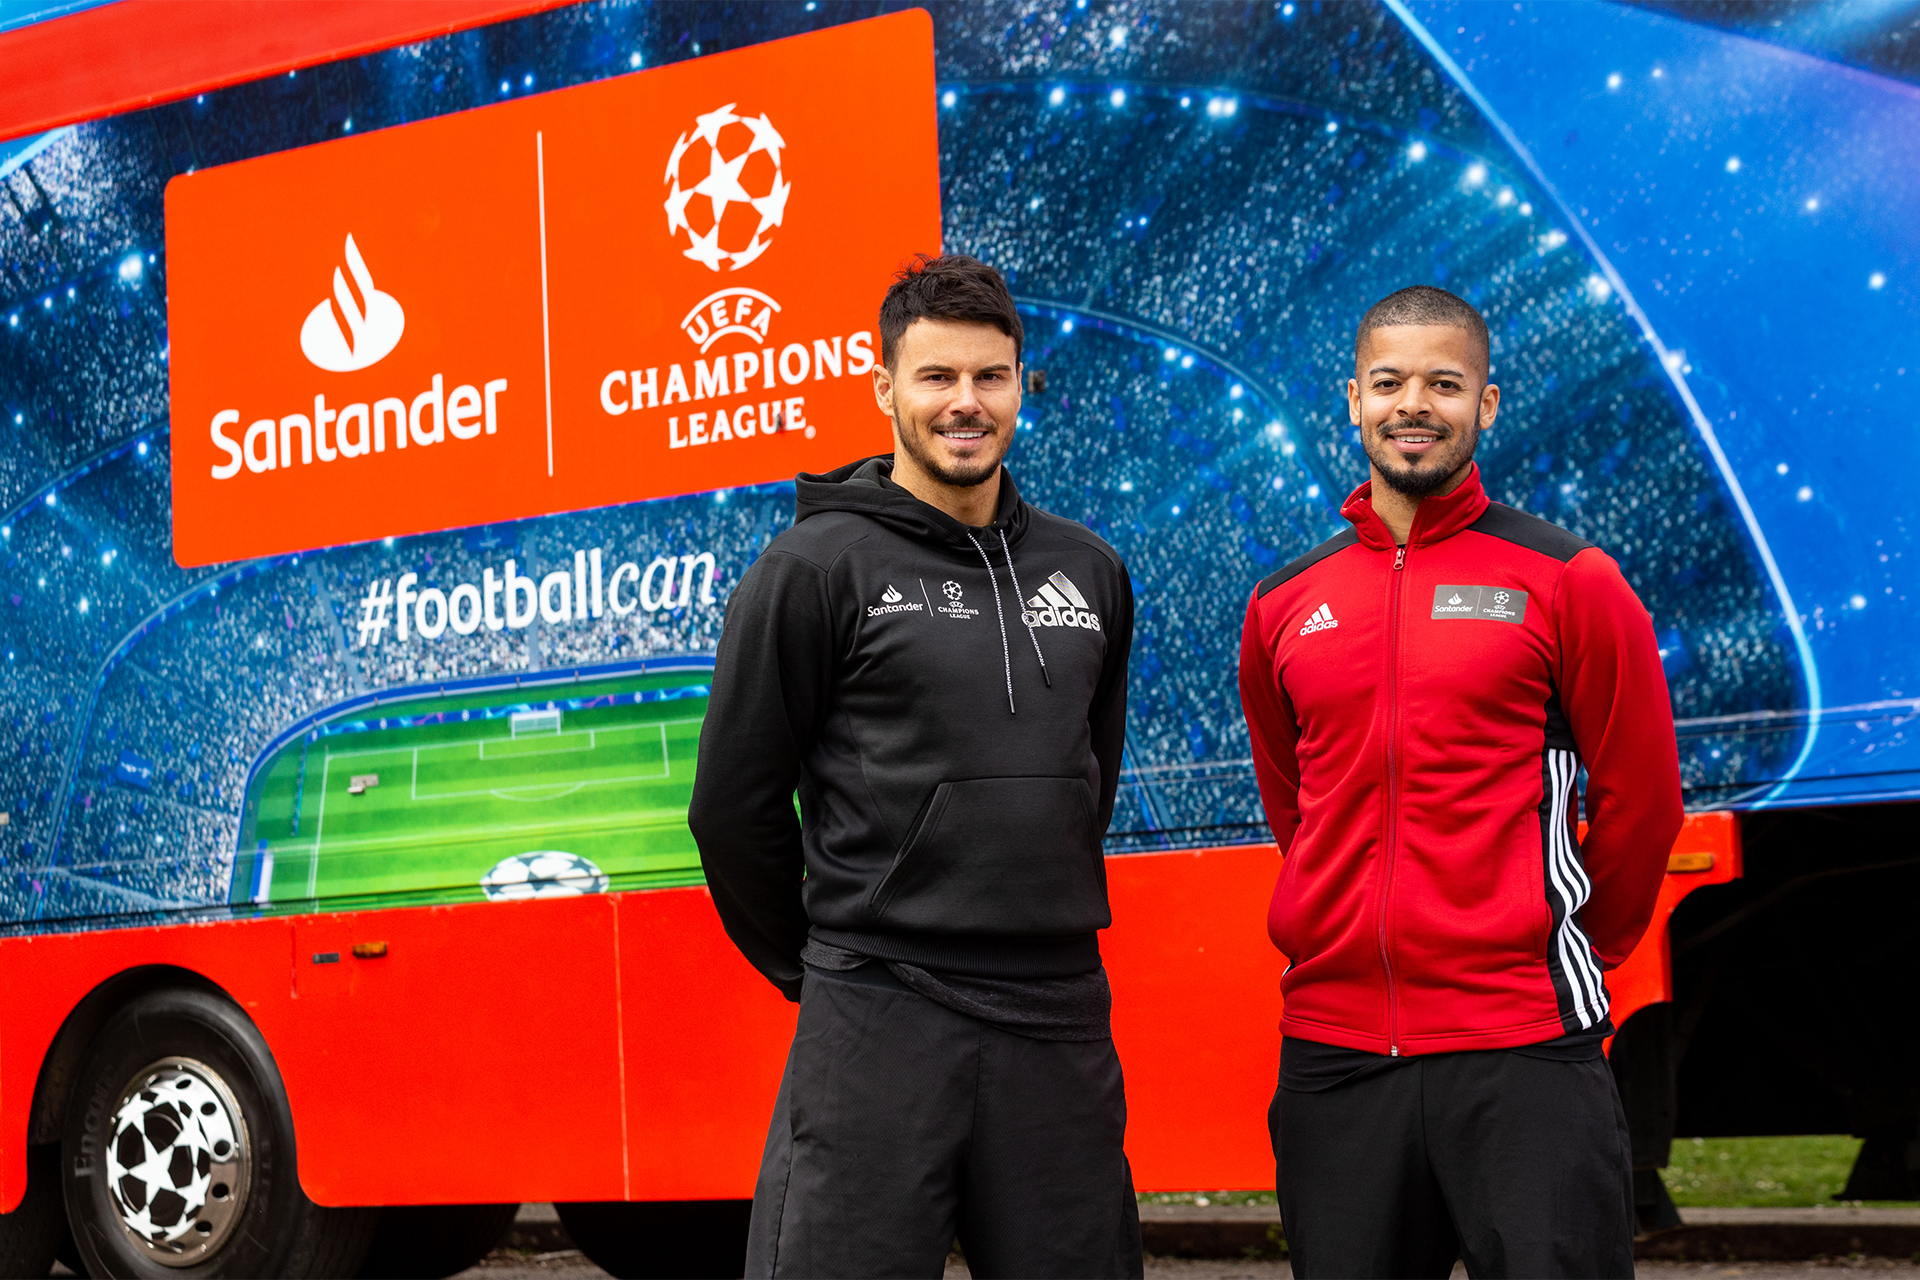 Santander Uk And Twinkl Are Bringing Mathematics And Children Closer Together With Help From The F2 Freestylers